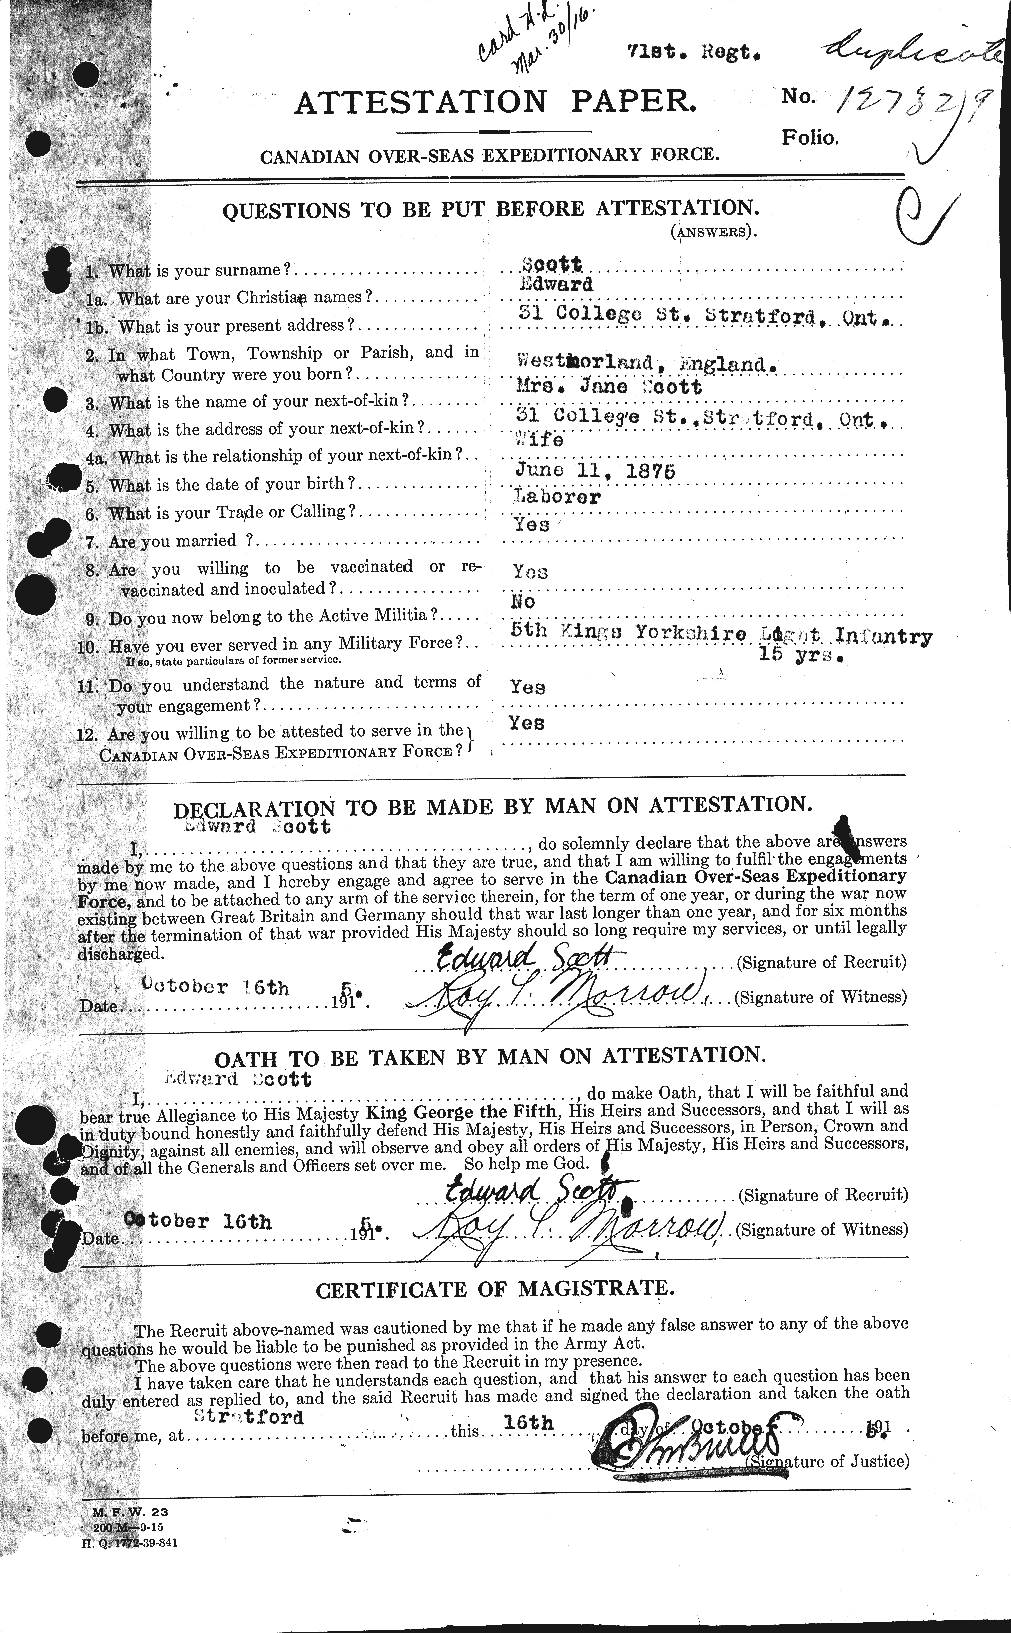 Personnel Records of the First World War - CEF 085326a